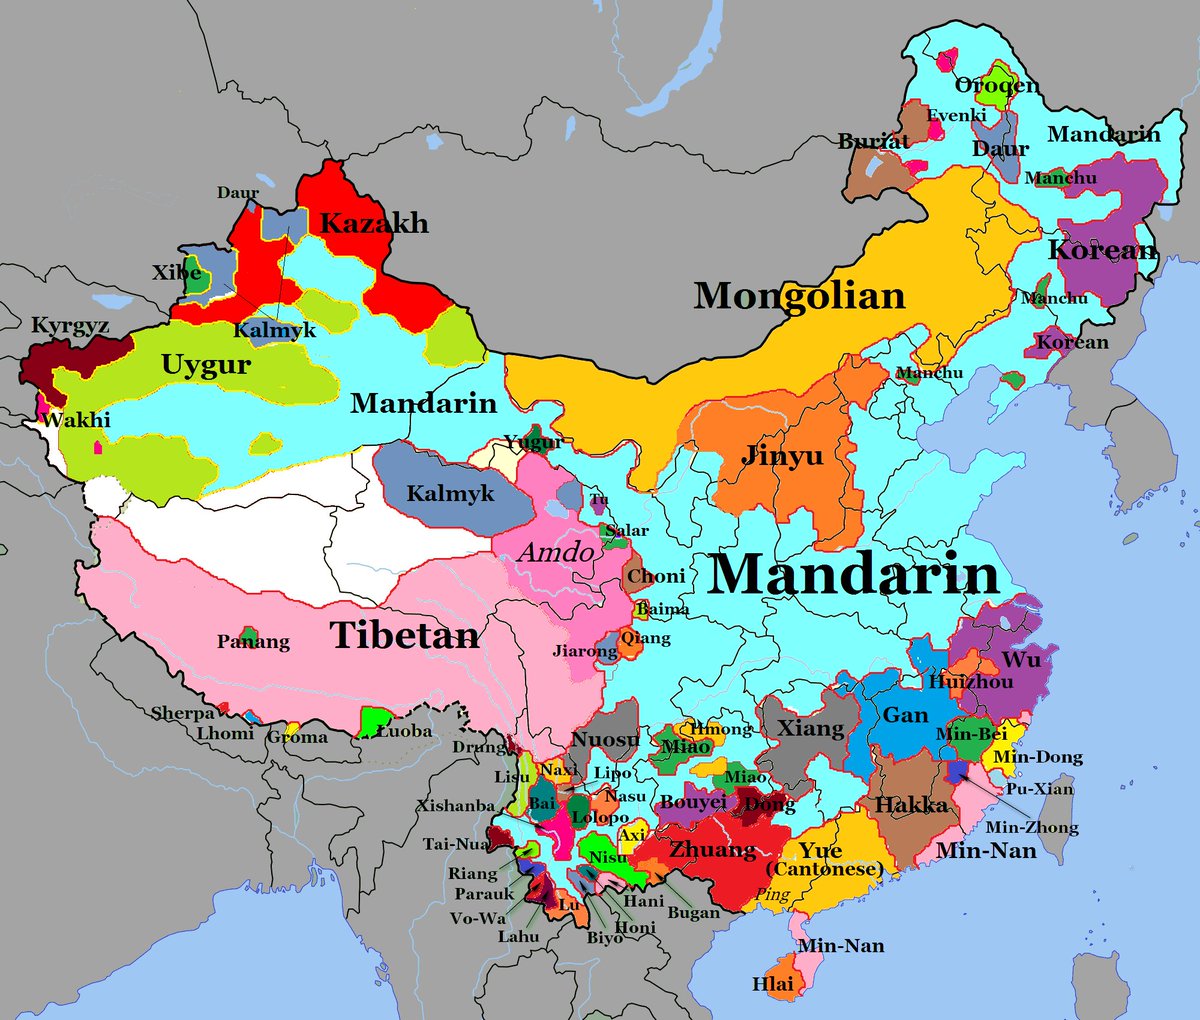 Map of languages spoken in China